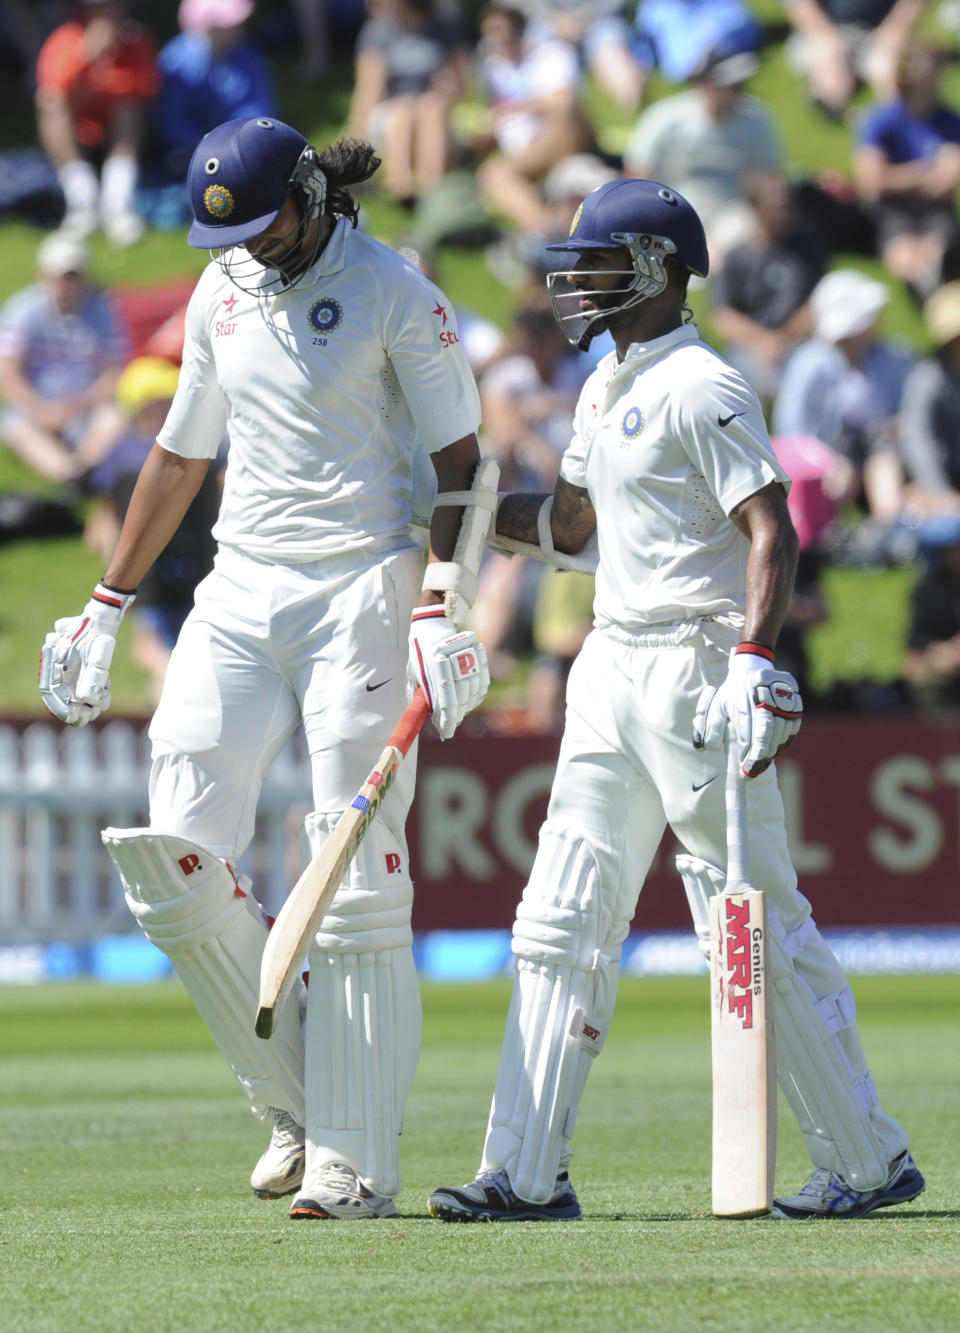 India’s Ishant Sharma, left, receives a reassuring pat from India’s Shikar Dhawan as he departs out for 26 off the bowling of New Zealand’s Trent Boult on the second day of the second cricket test in Wellington, New Zealand, Saturday, Feb. 15, 2014. (AP Photo/SNPA, Ross Setford) NEW ZEALAND OUT